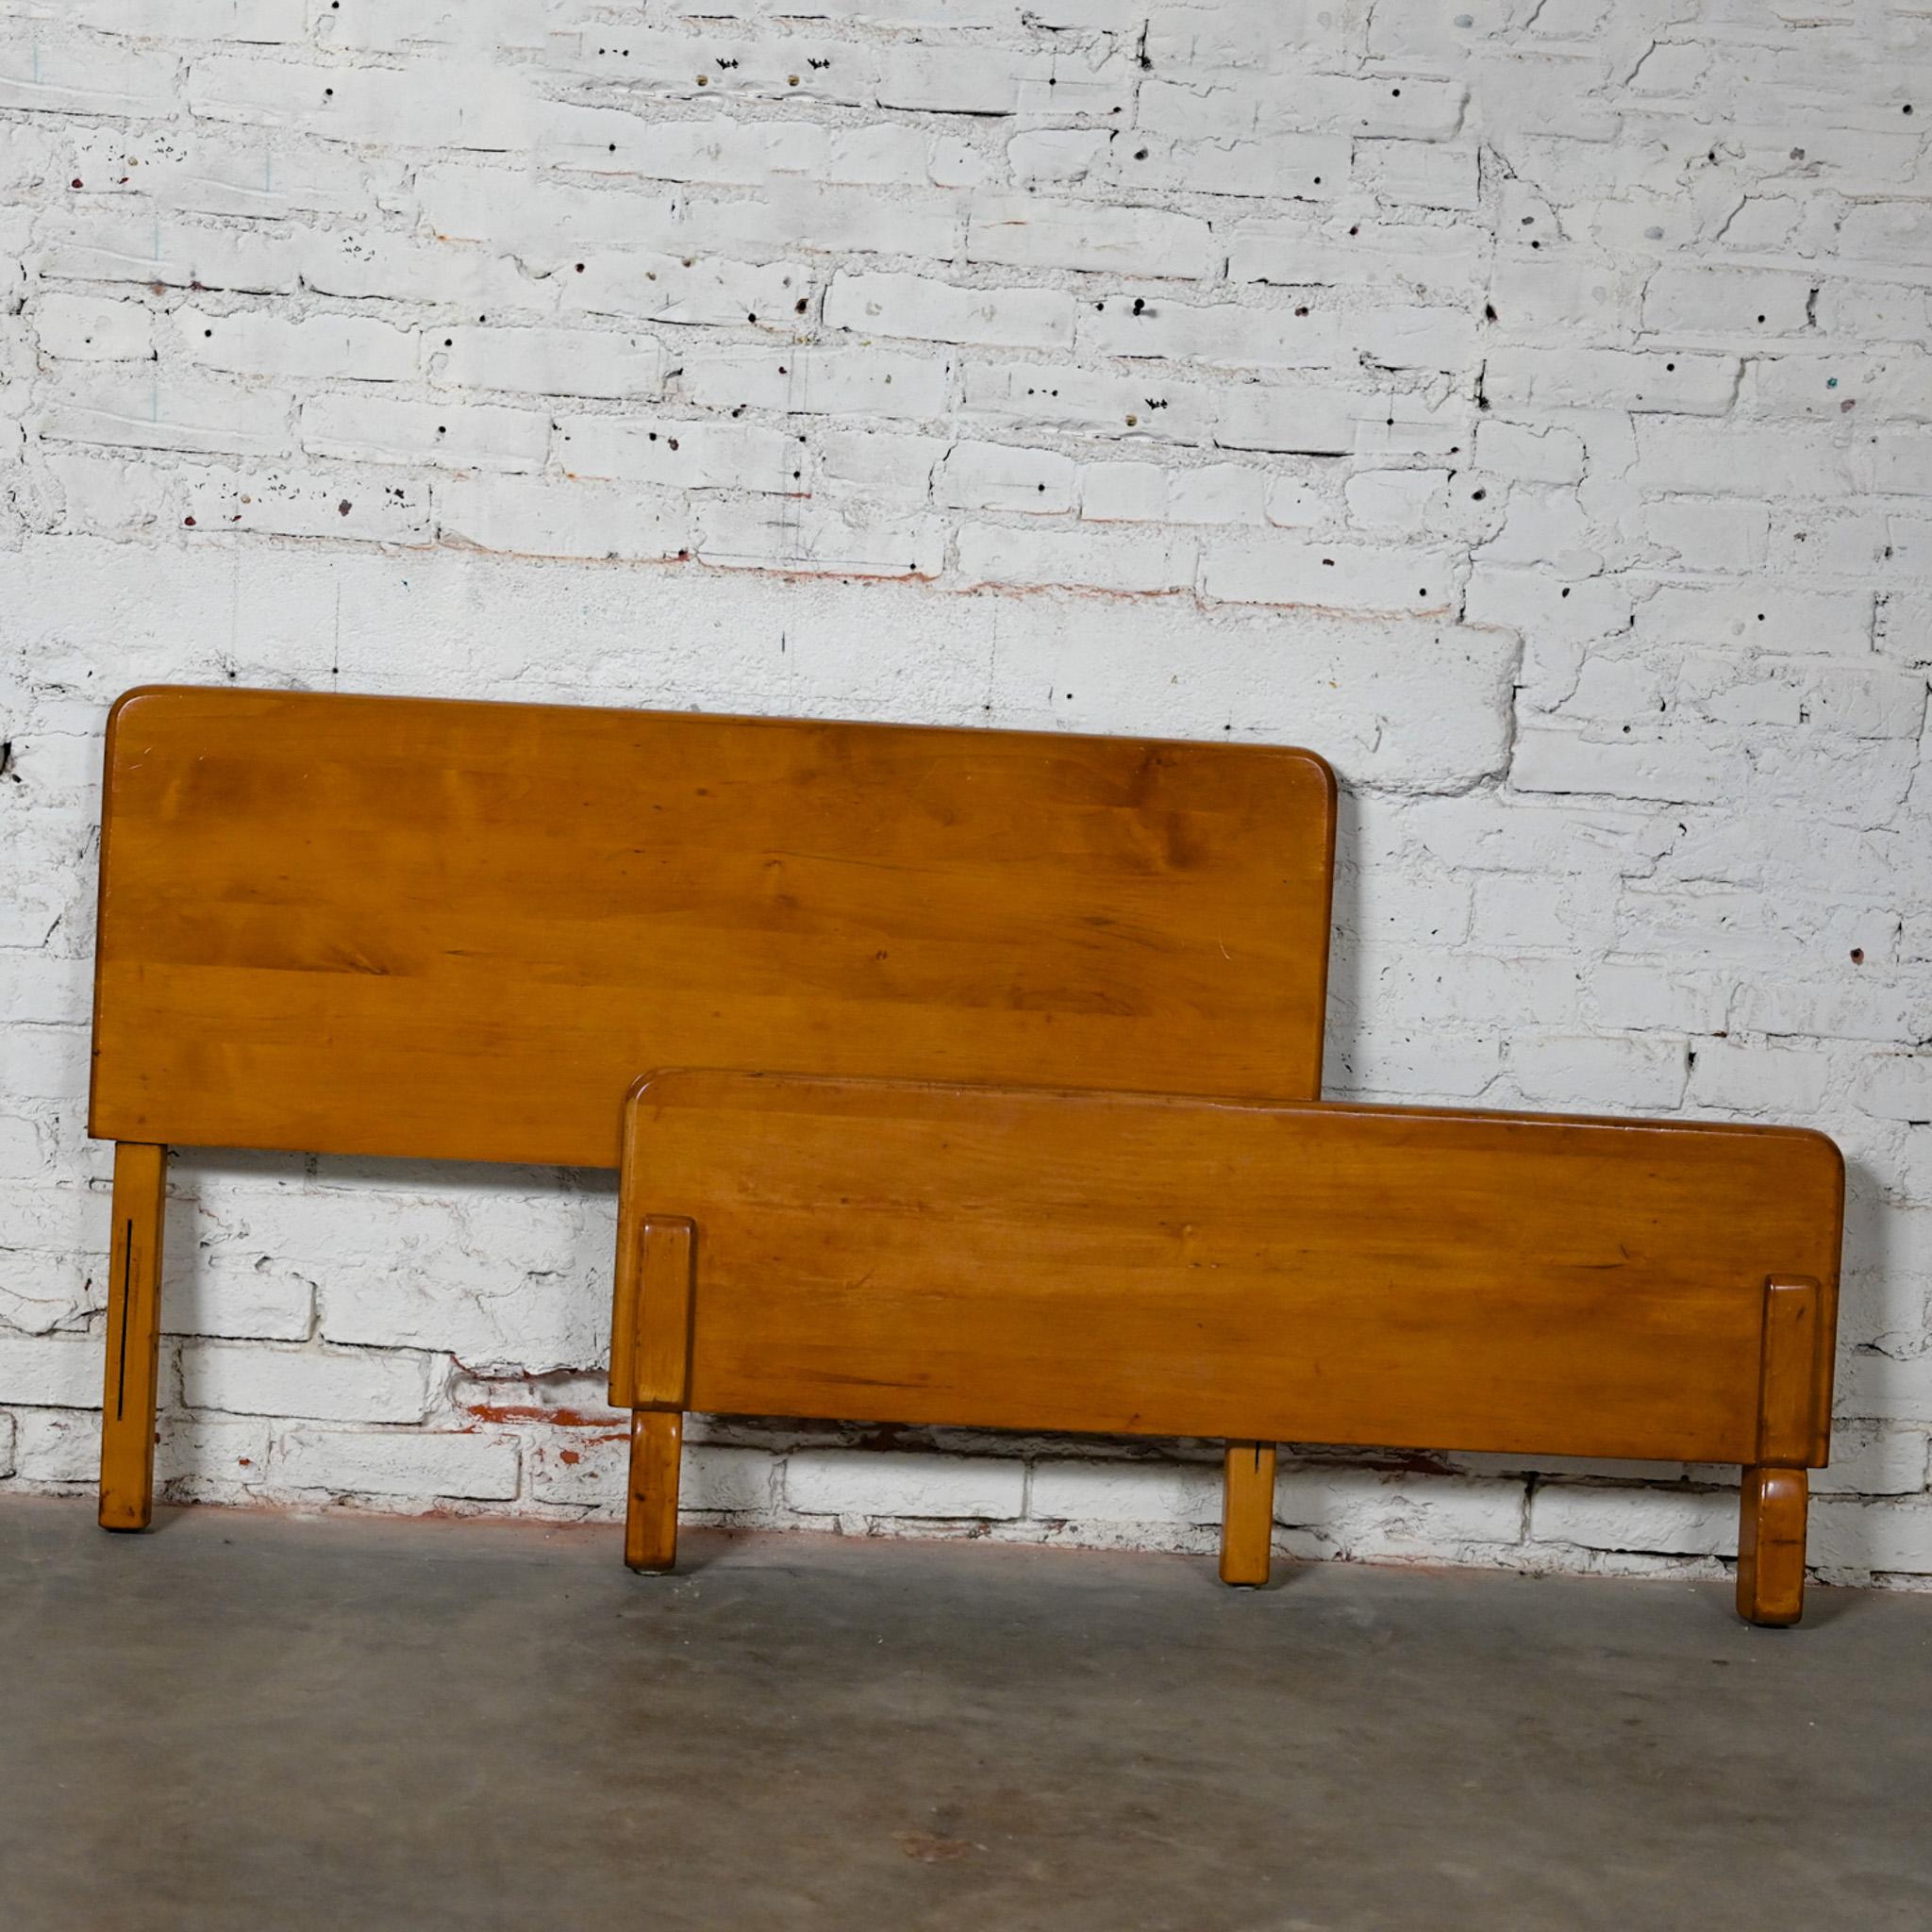 Early-Mid-20th Century Art Moderne Maple Twin Bed Headboard & Footboard  For Sale 4